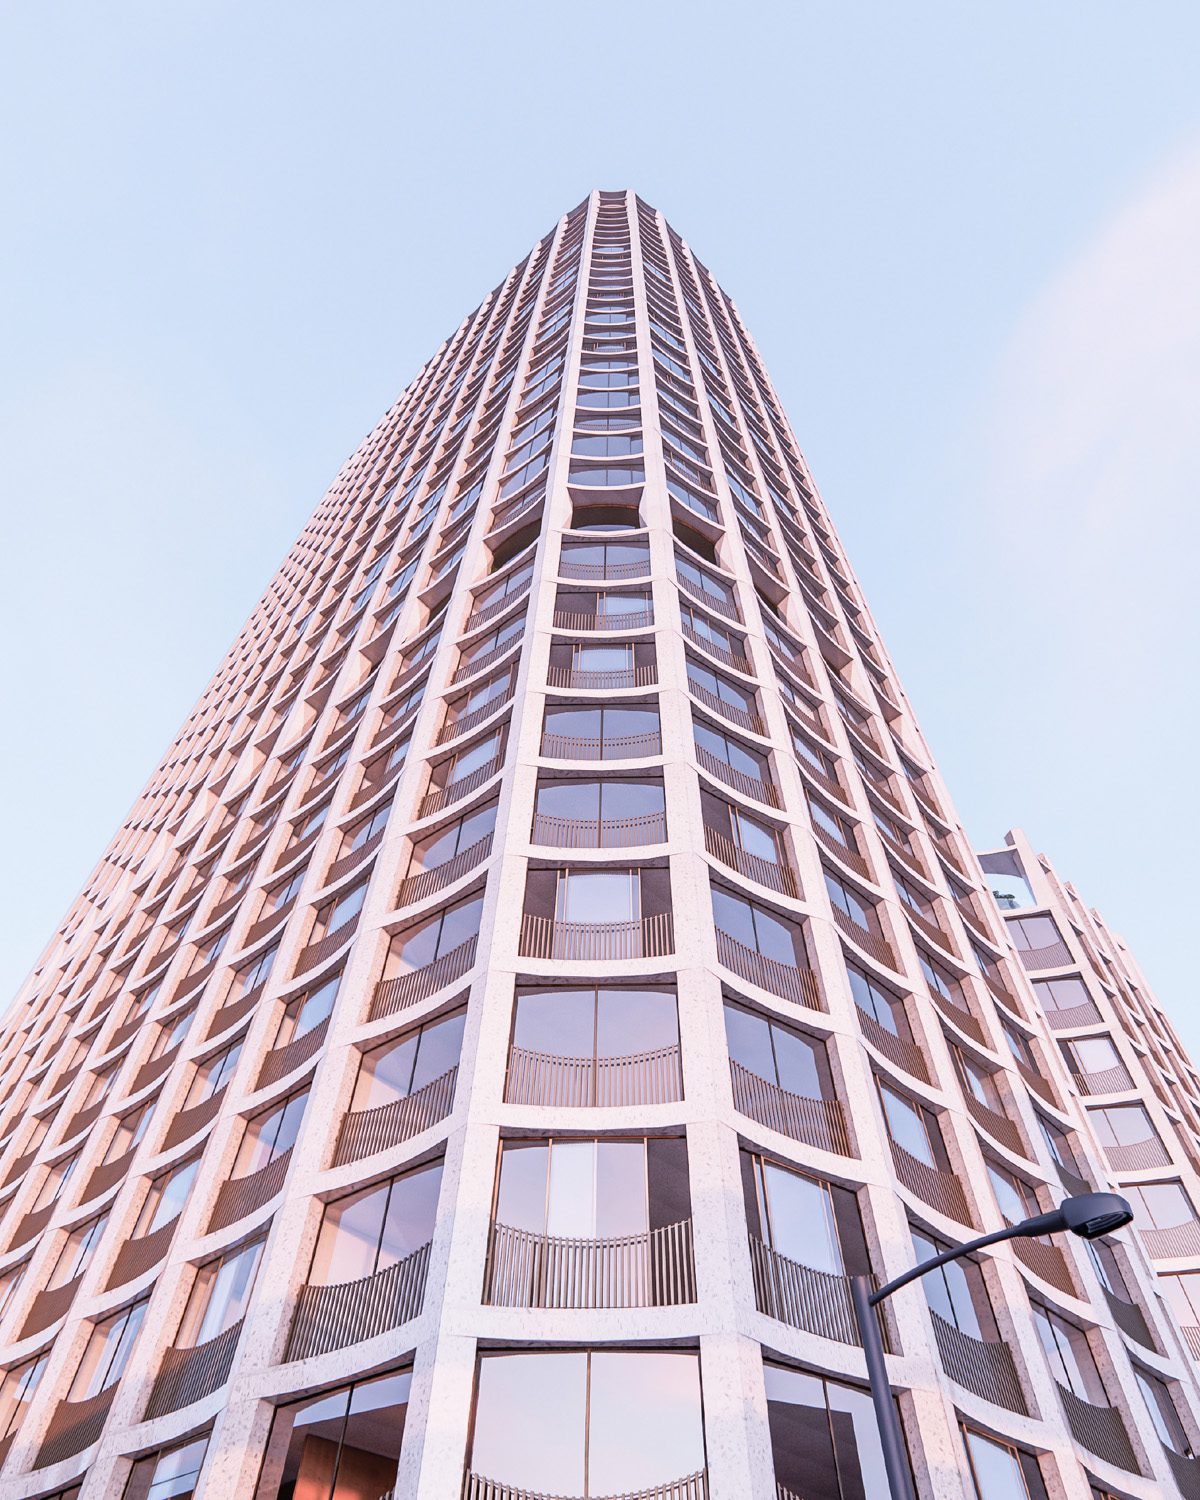 Rendering of 395 3rd Street looking up from the ground. Rendering by Henning Larsen.